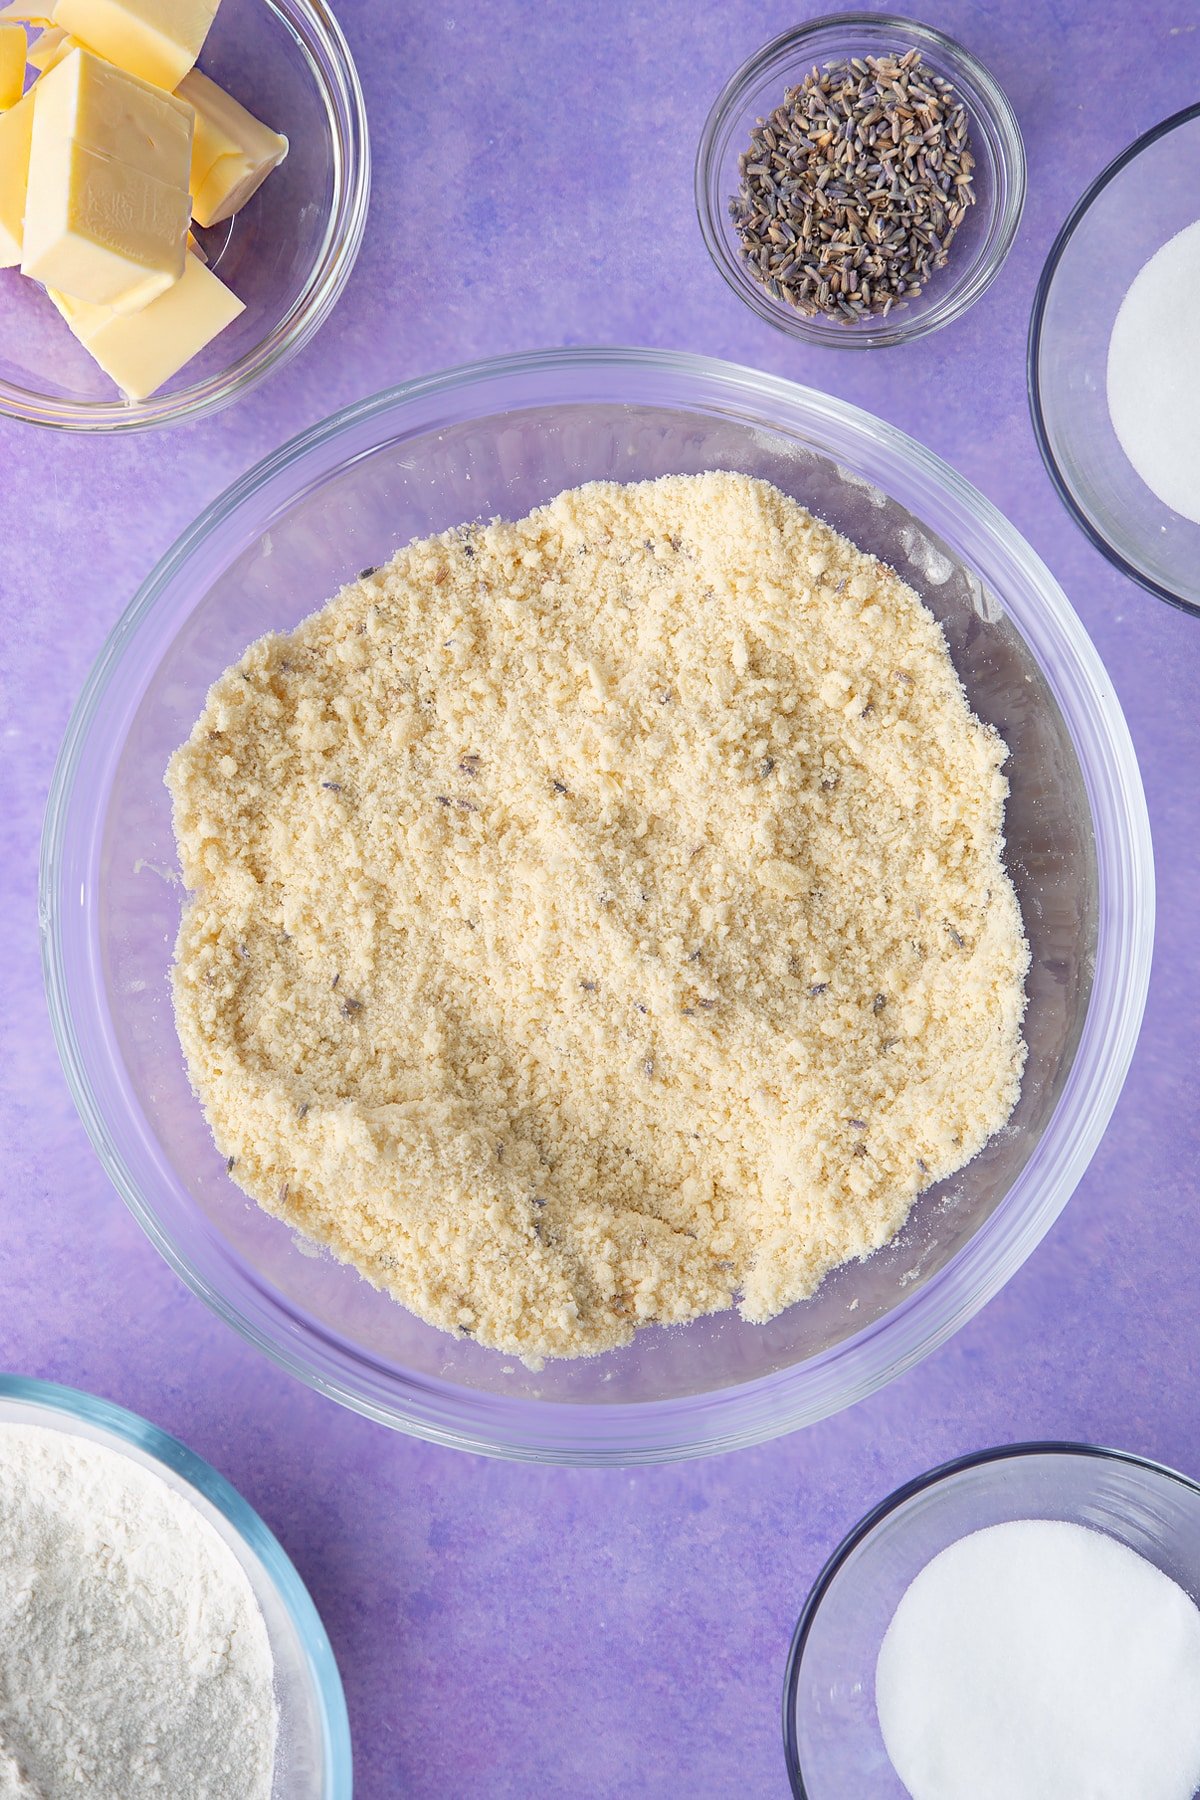 Flour, sugar, butter and lavender mixed to a crumb in a bowl. Ingredients to make lavender shortbread cookies.